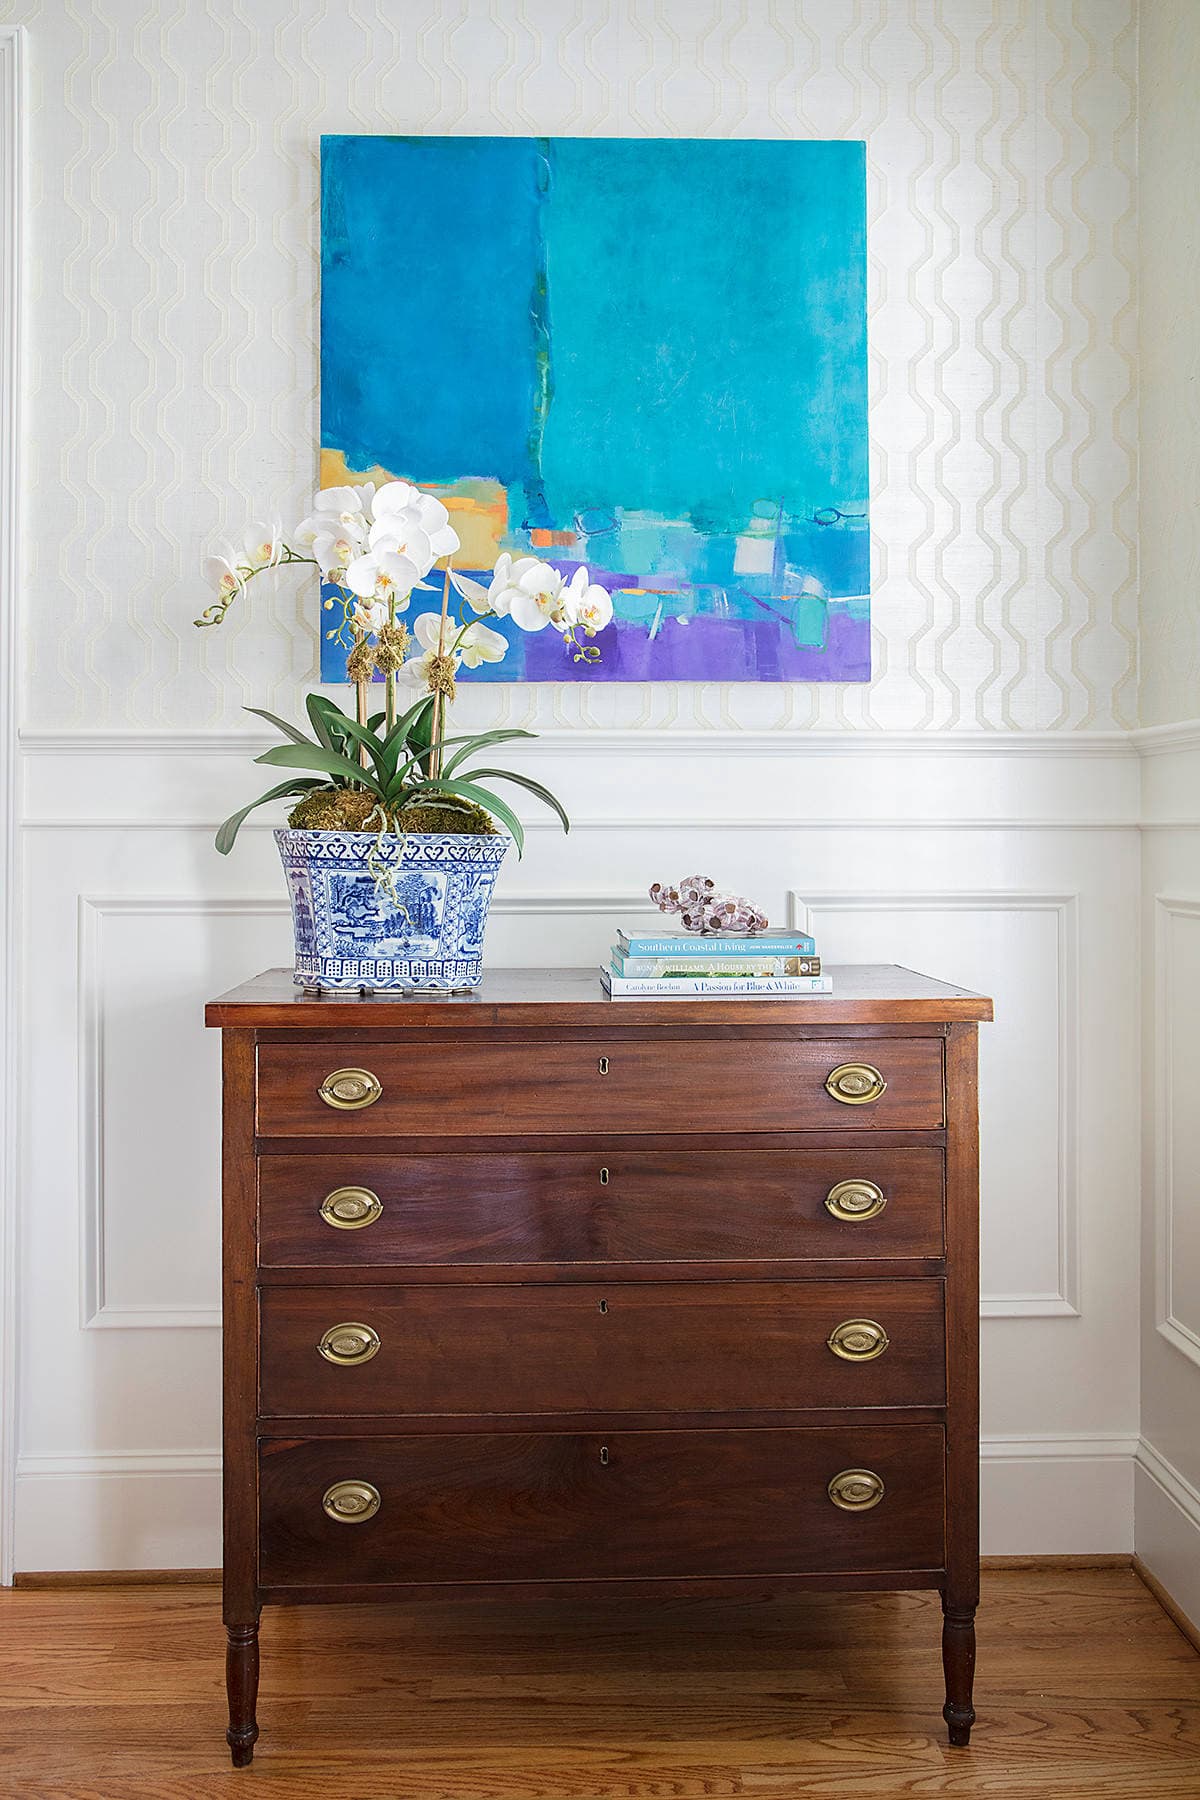 Home tour: Chest drawer in dark wood with a colorful artwork above it